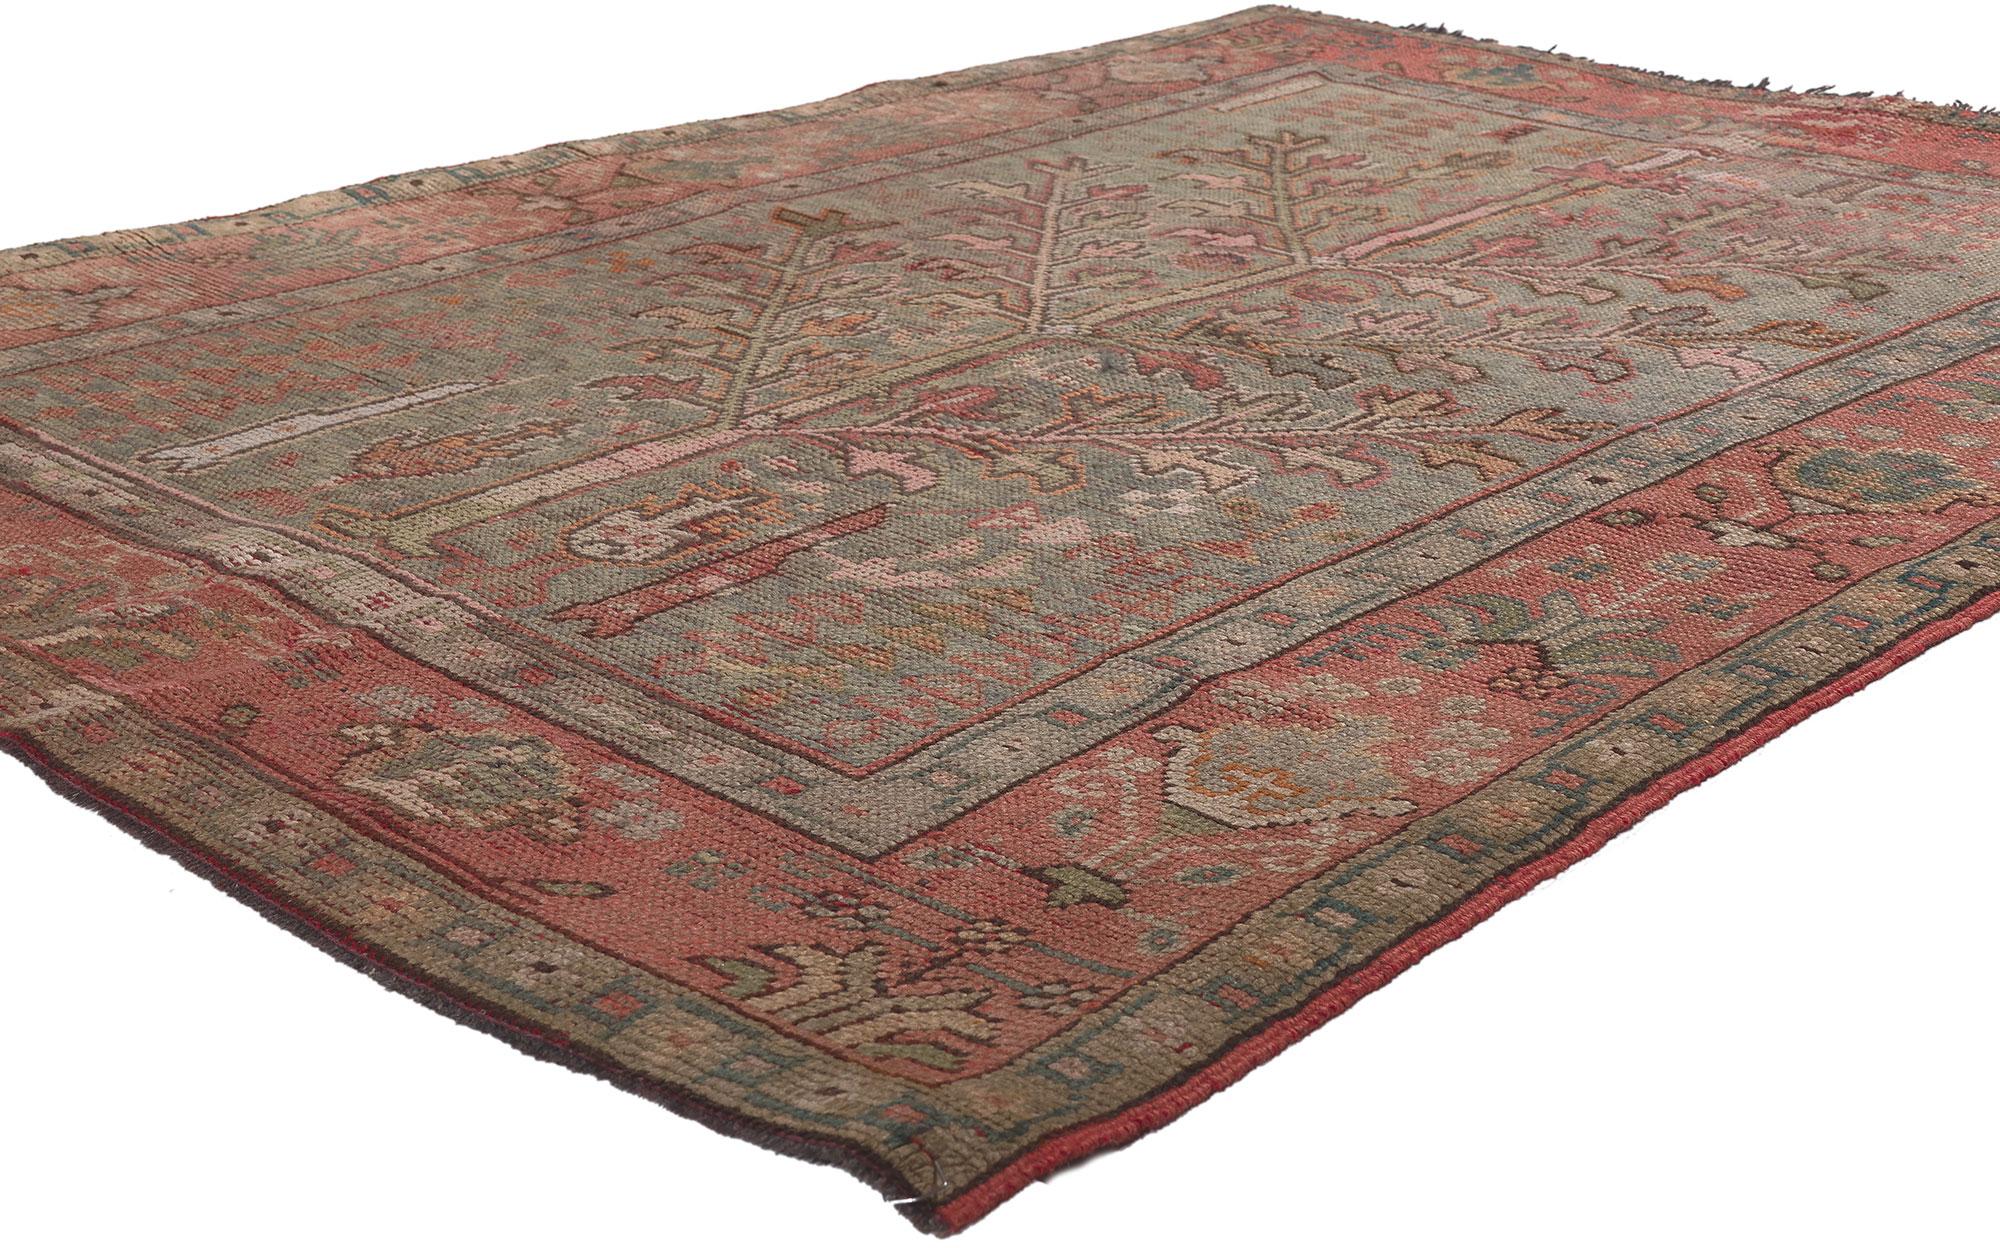 74049 Antique Turkish Oushak Rug, 04'09 x 06'05.
Cultured and beguiling with incredible detail and texture, this hand knotted wool antique Turkish Oushak rug will take on a global lived-in look that feels timeless while imparting a sense of warmth